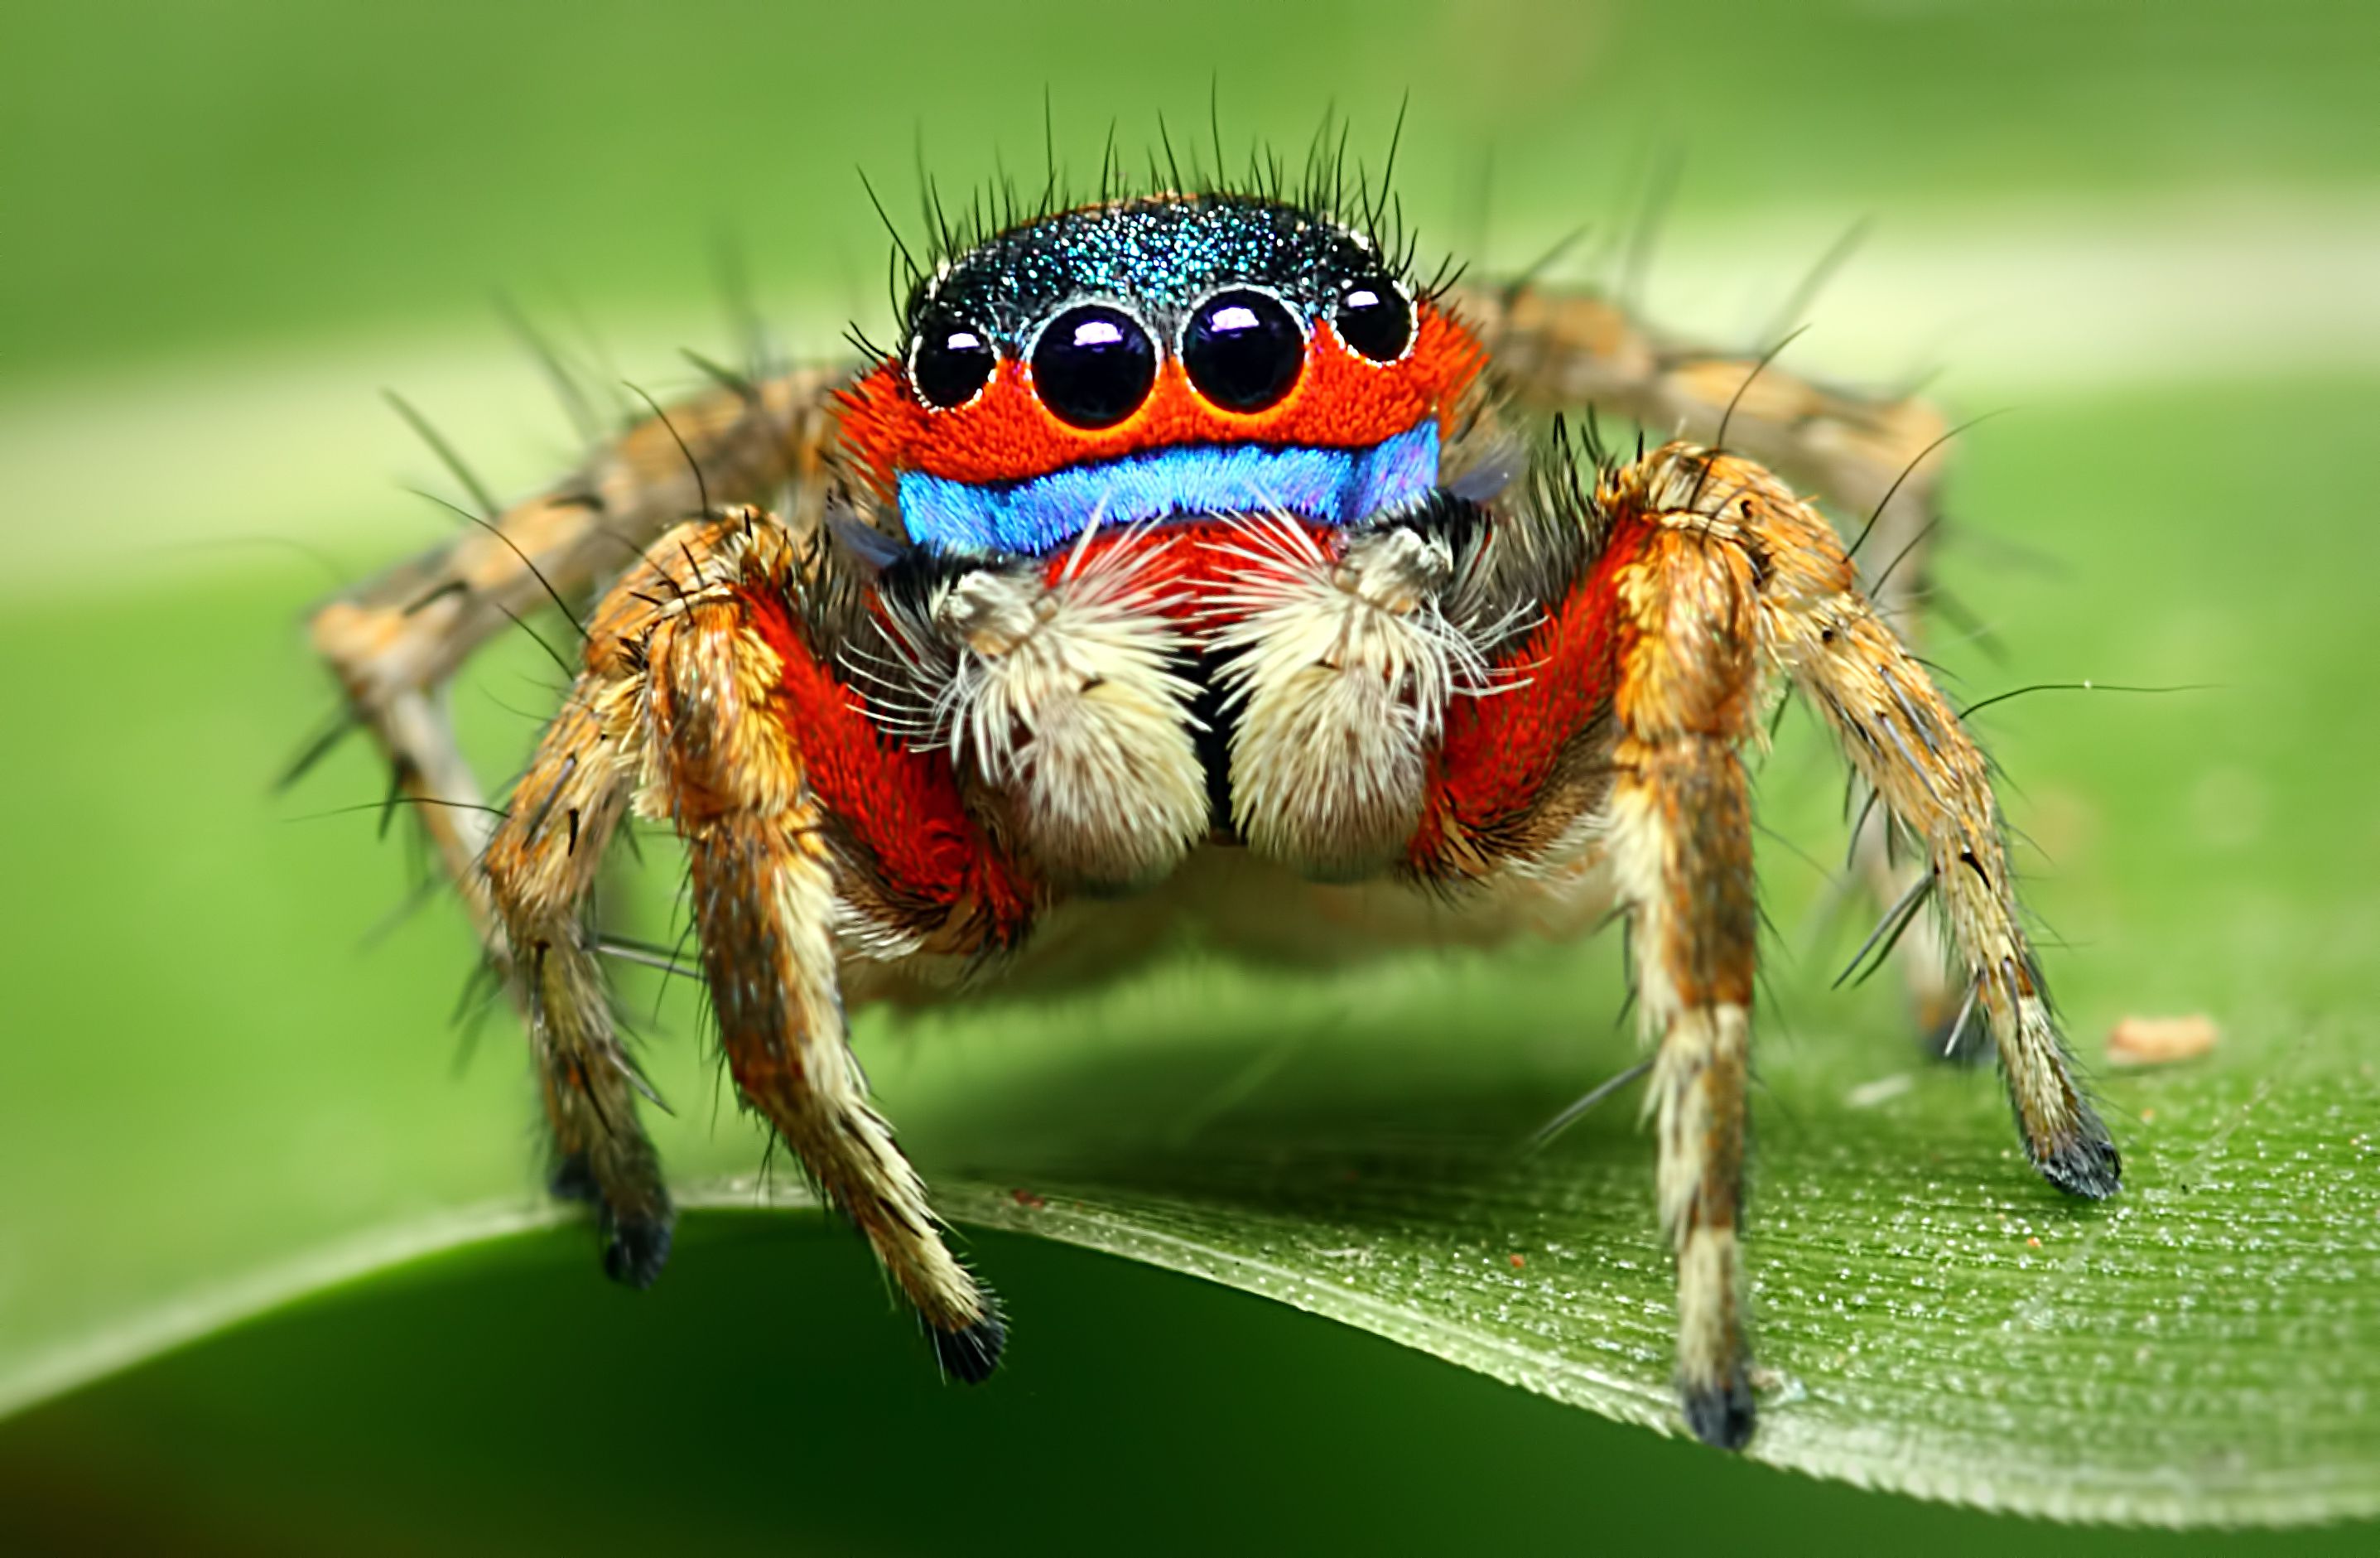 Wild and Crazy Facts About Jumping Spiders